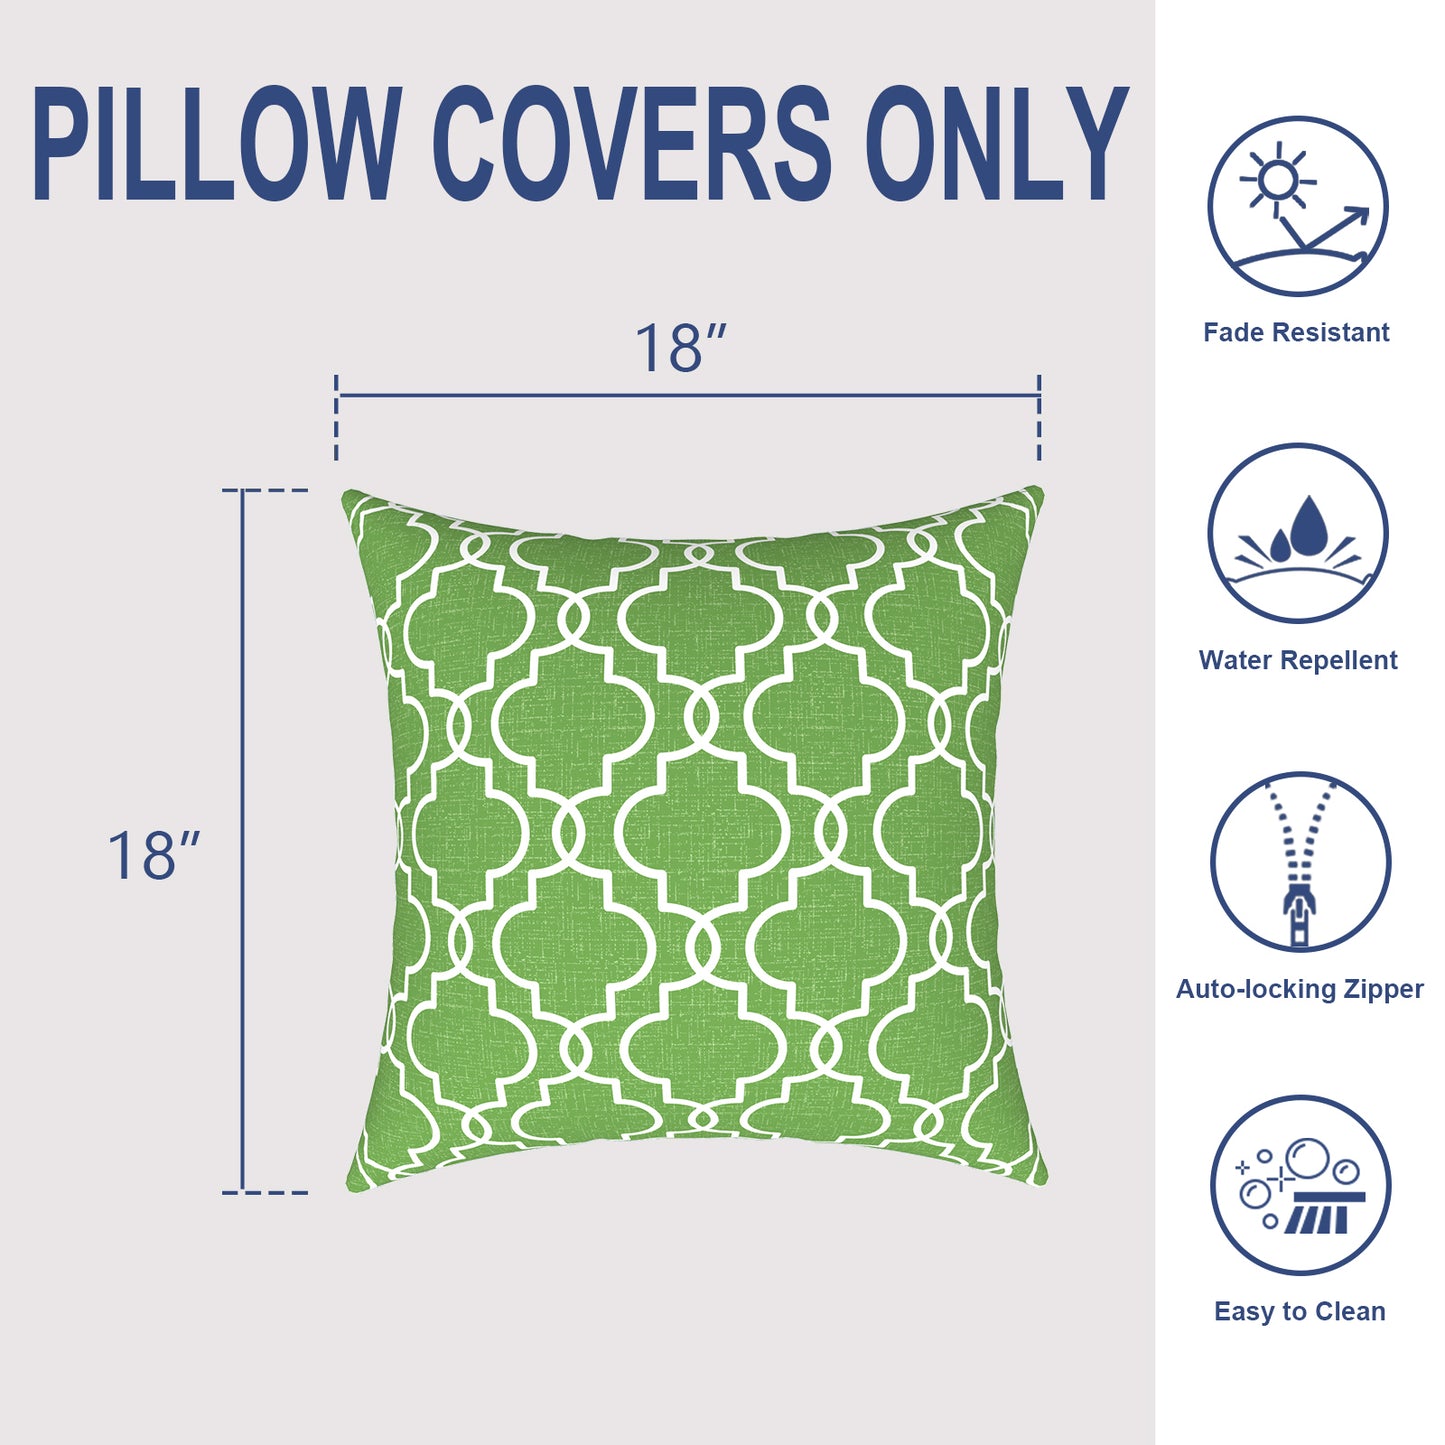 Melody Elephant Outdoor Throw Pillow Covers Pack of 2, Decorative Water Repellent Square Pillow Cases 18x18 Inch, Patio Pillowcases for Home Patio Furniture Use, Carmody Green